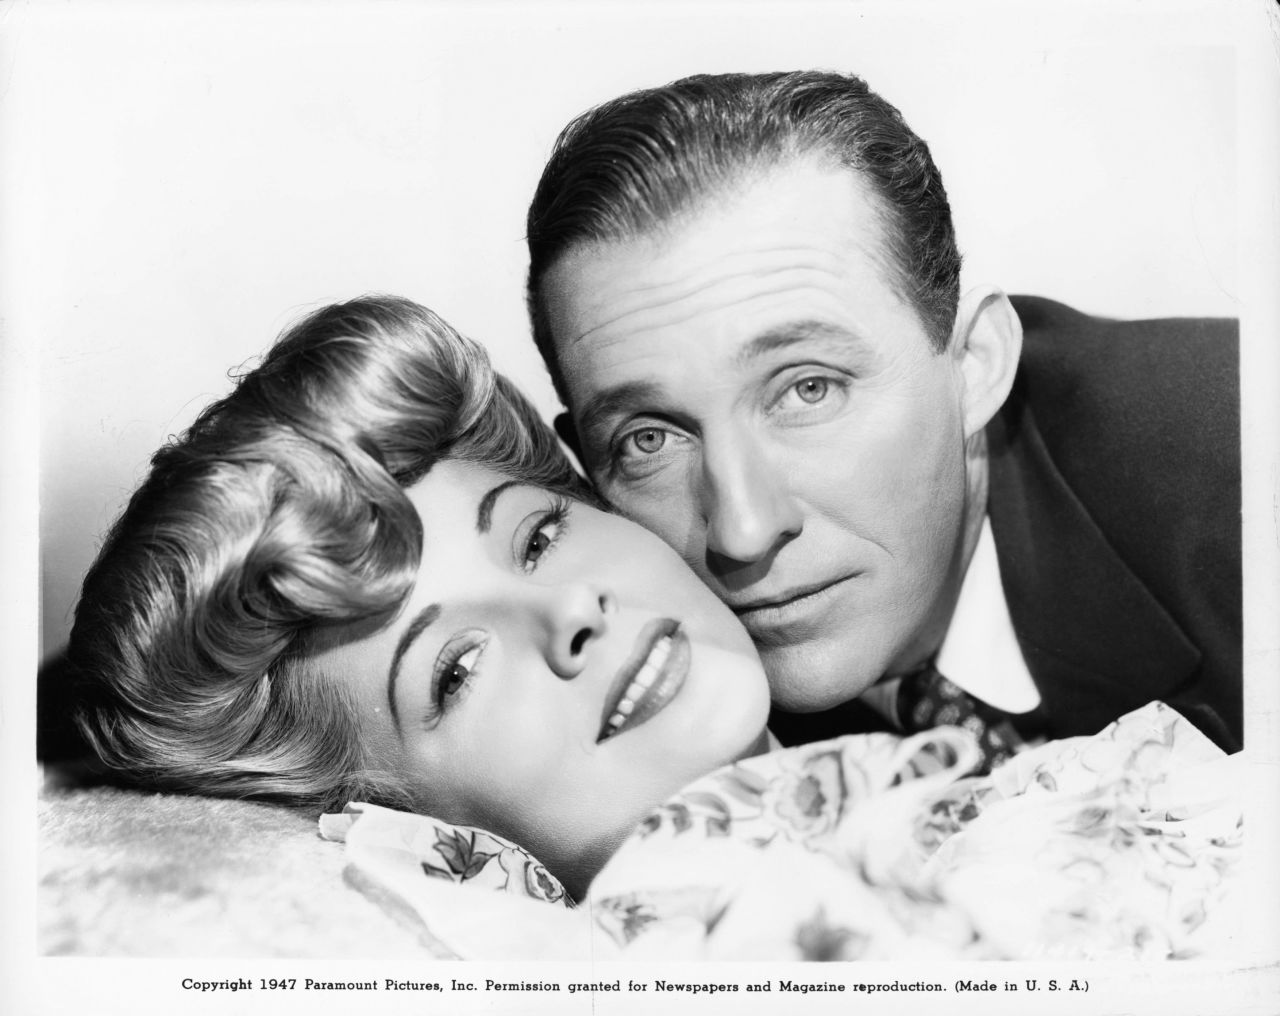 Fontaine and Bing Crosby, cheek to cheek in a scene from the film "The Emperor Waltz" in 1948.